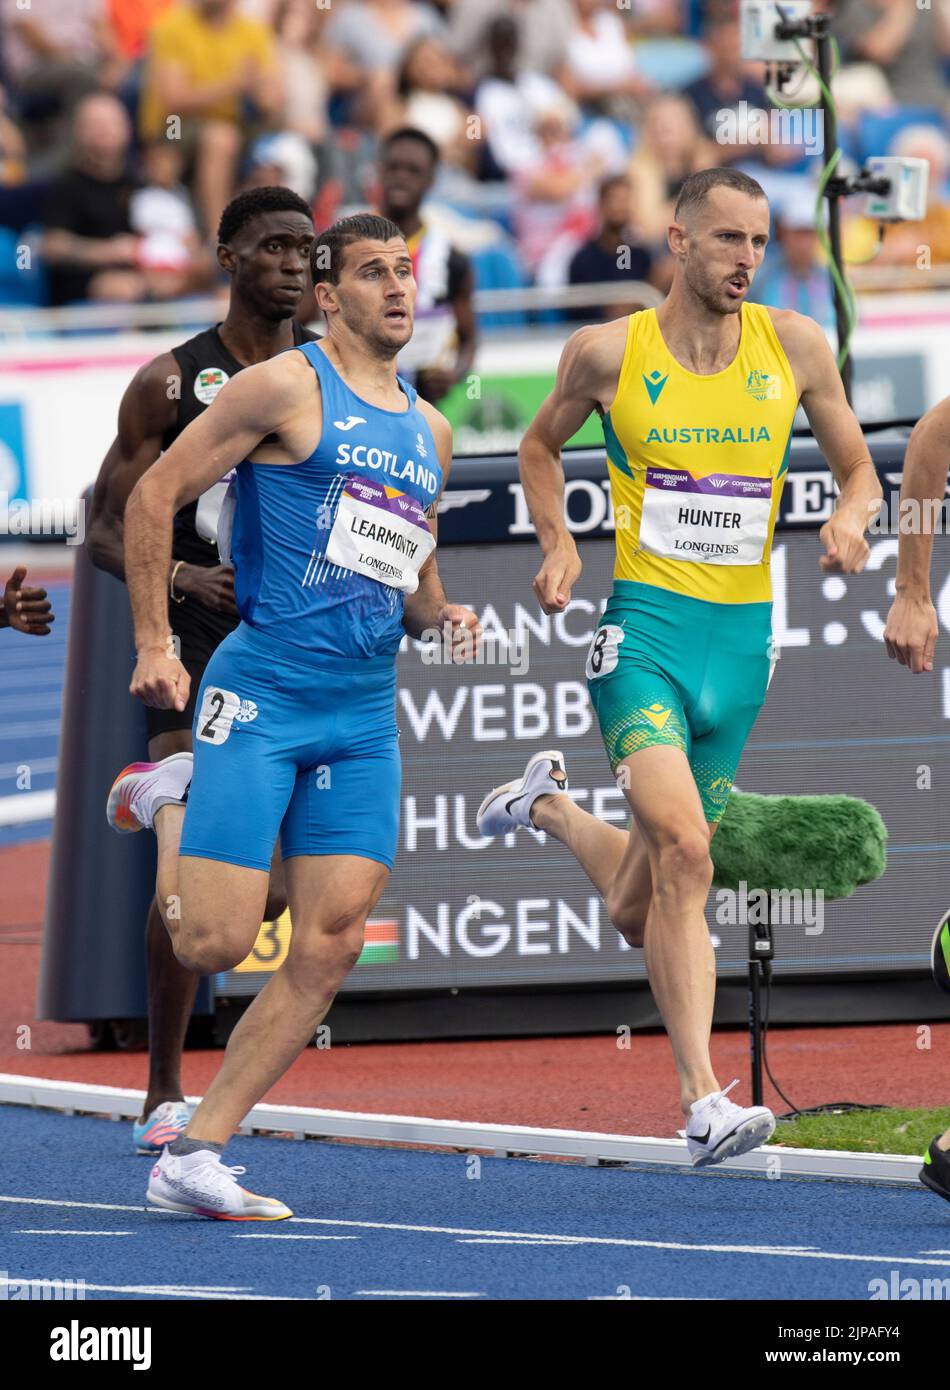 Guy Learmonth of Scotland and Charlie Hunter of Australia competing in the 800m heats at the Commonwealth Games at Alexander Stadium, Birmingham, Engl Stock Photo